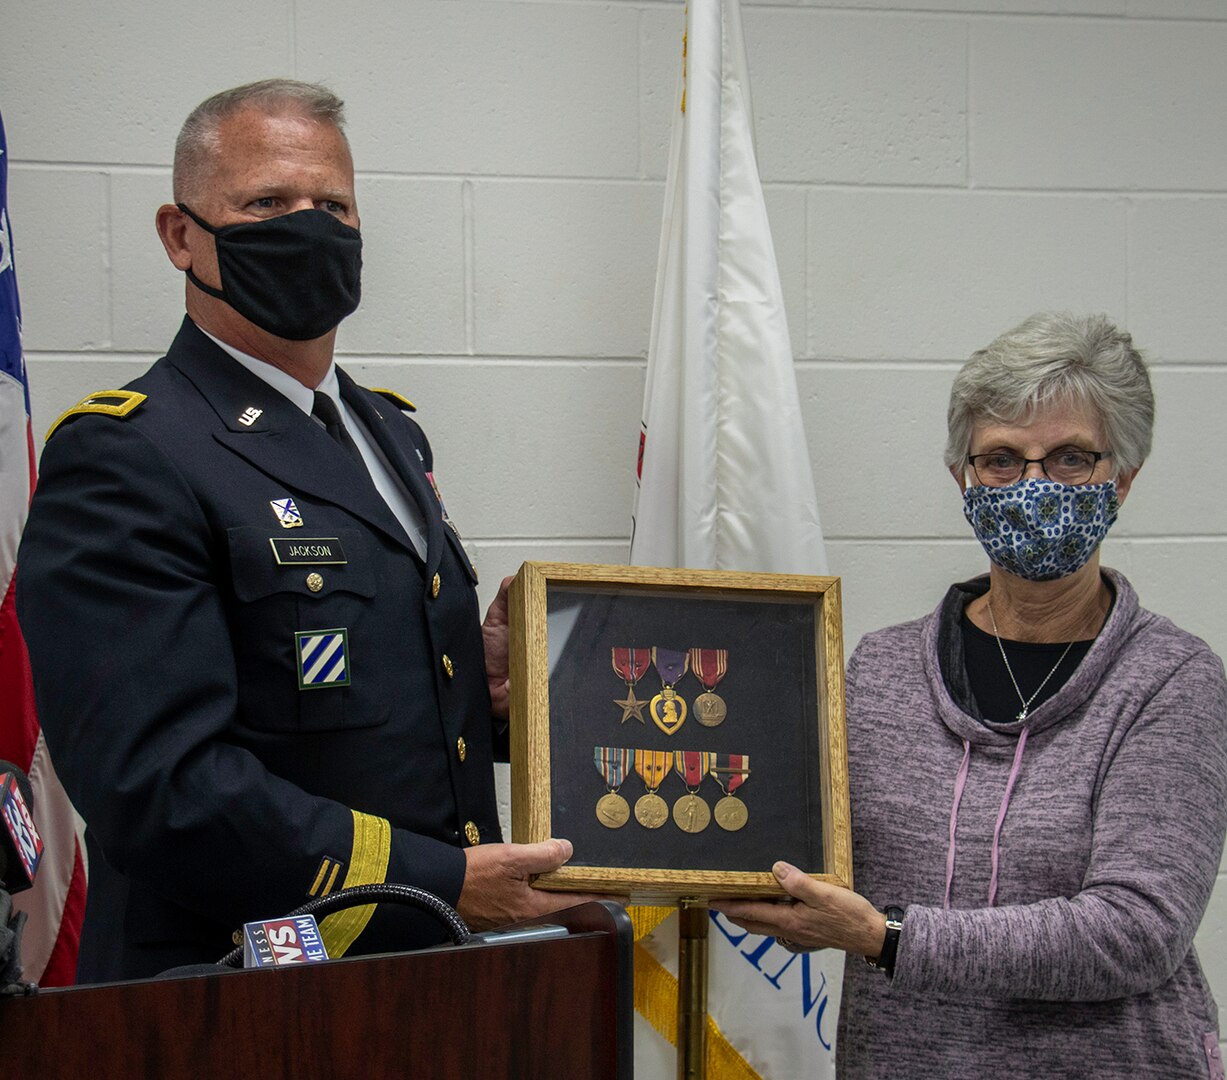 Kathy Andersen, of Roscoe, Illinois, great niece of the late Homer Stanger, accepts Stanger’s returned medals